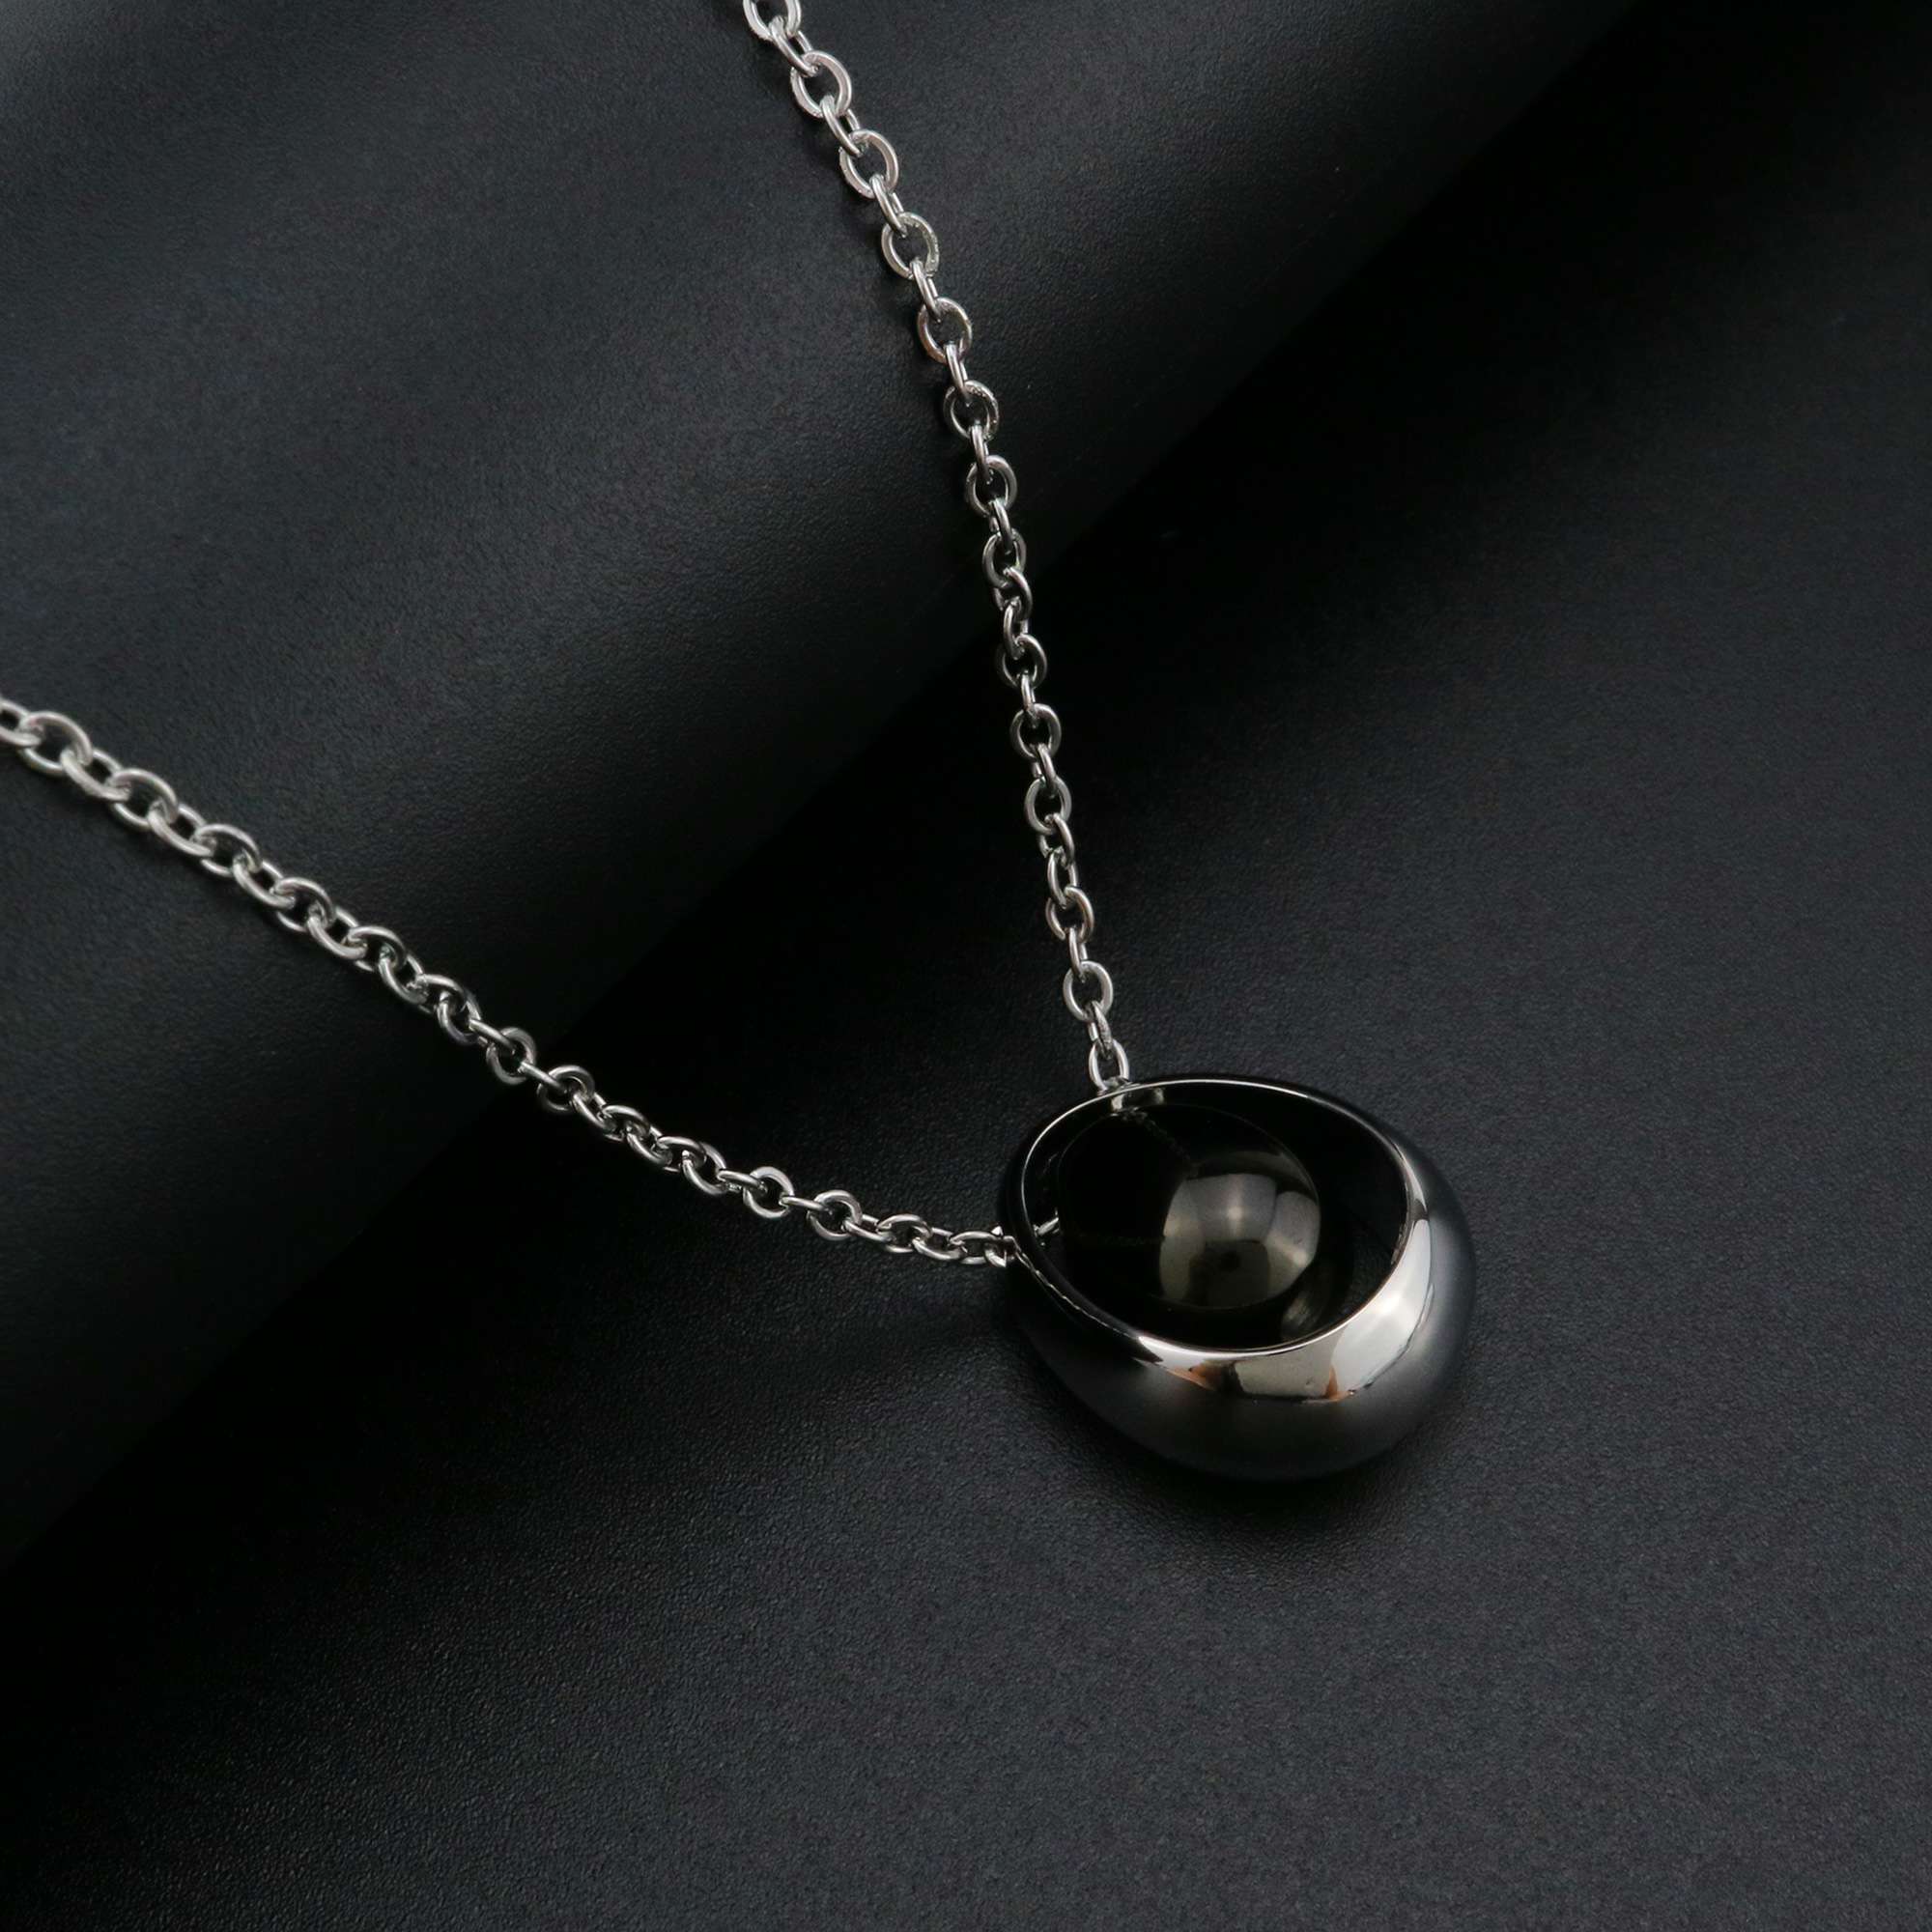 1Pcs Stainless Steel Egg Keepsake Ash Canister Set Cremation Urn Wish Vial Pendant Prayer Box 18x22MM 22+2Inch Necklace for Men 1190024 - Click Image to Close